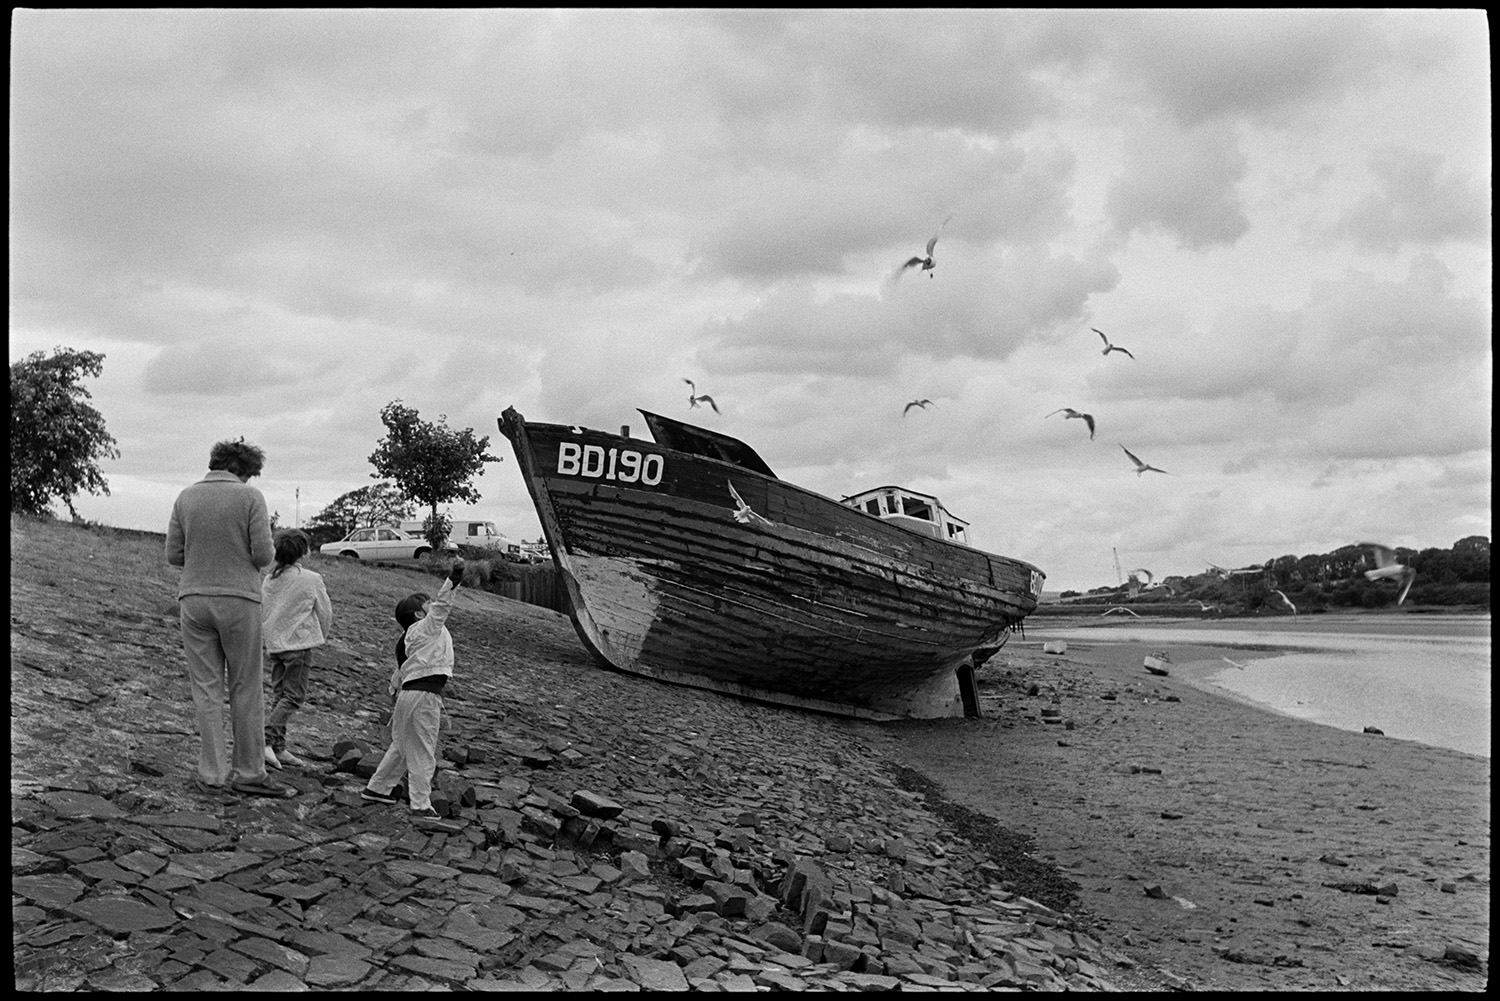 Old wooden fishing boats shortly before they were cut up, new bridge in background.<br />
[An old wooden fishing boat on the banks of the River Torridge at Bideford. A person with two children are alongside the boat with seagulls flying around in a cloudy sky. The number 'BD190' is painted on the boat.]